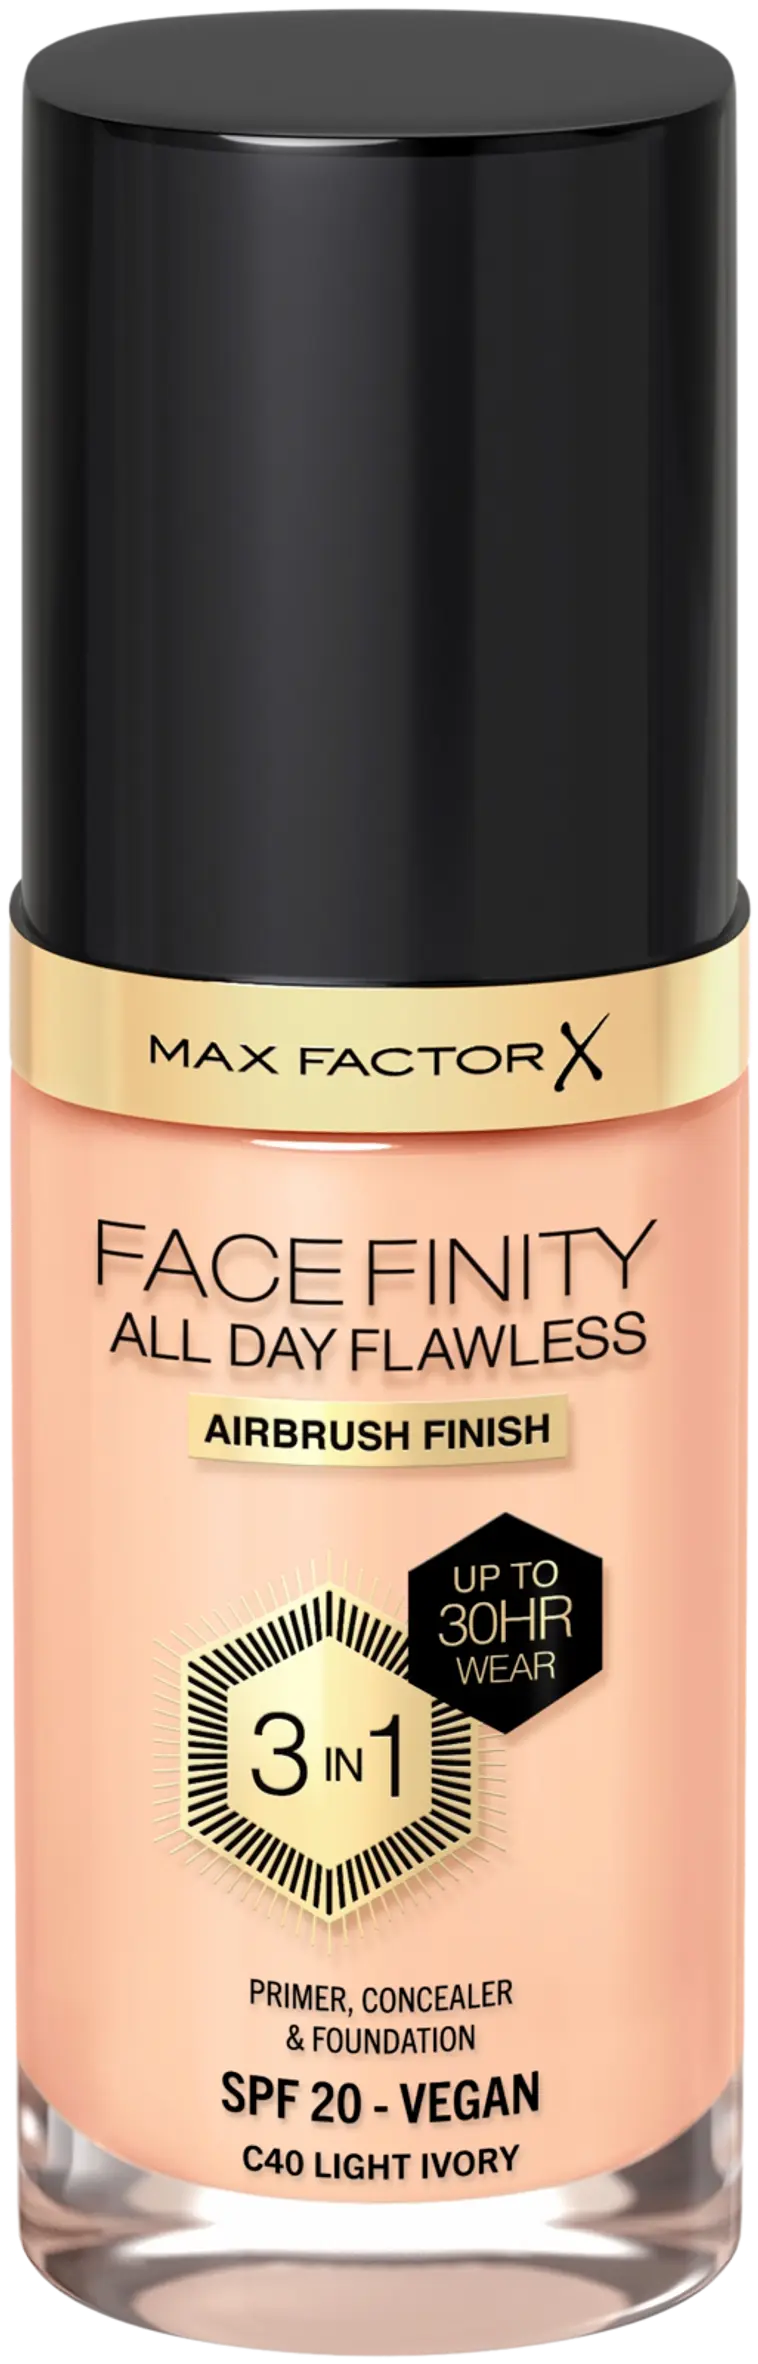 Max Factor Facefinity All Day Flawless Foundation meikkivoide 30 ml